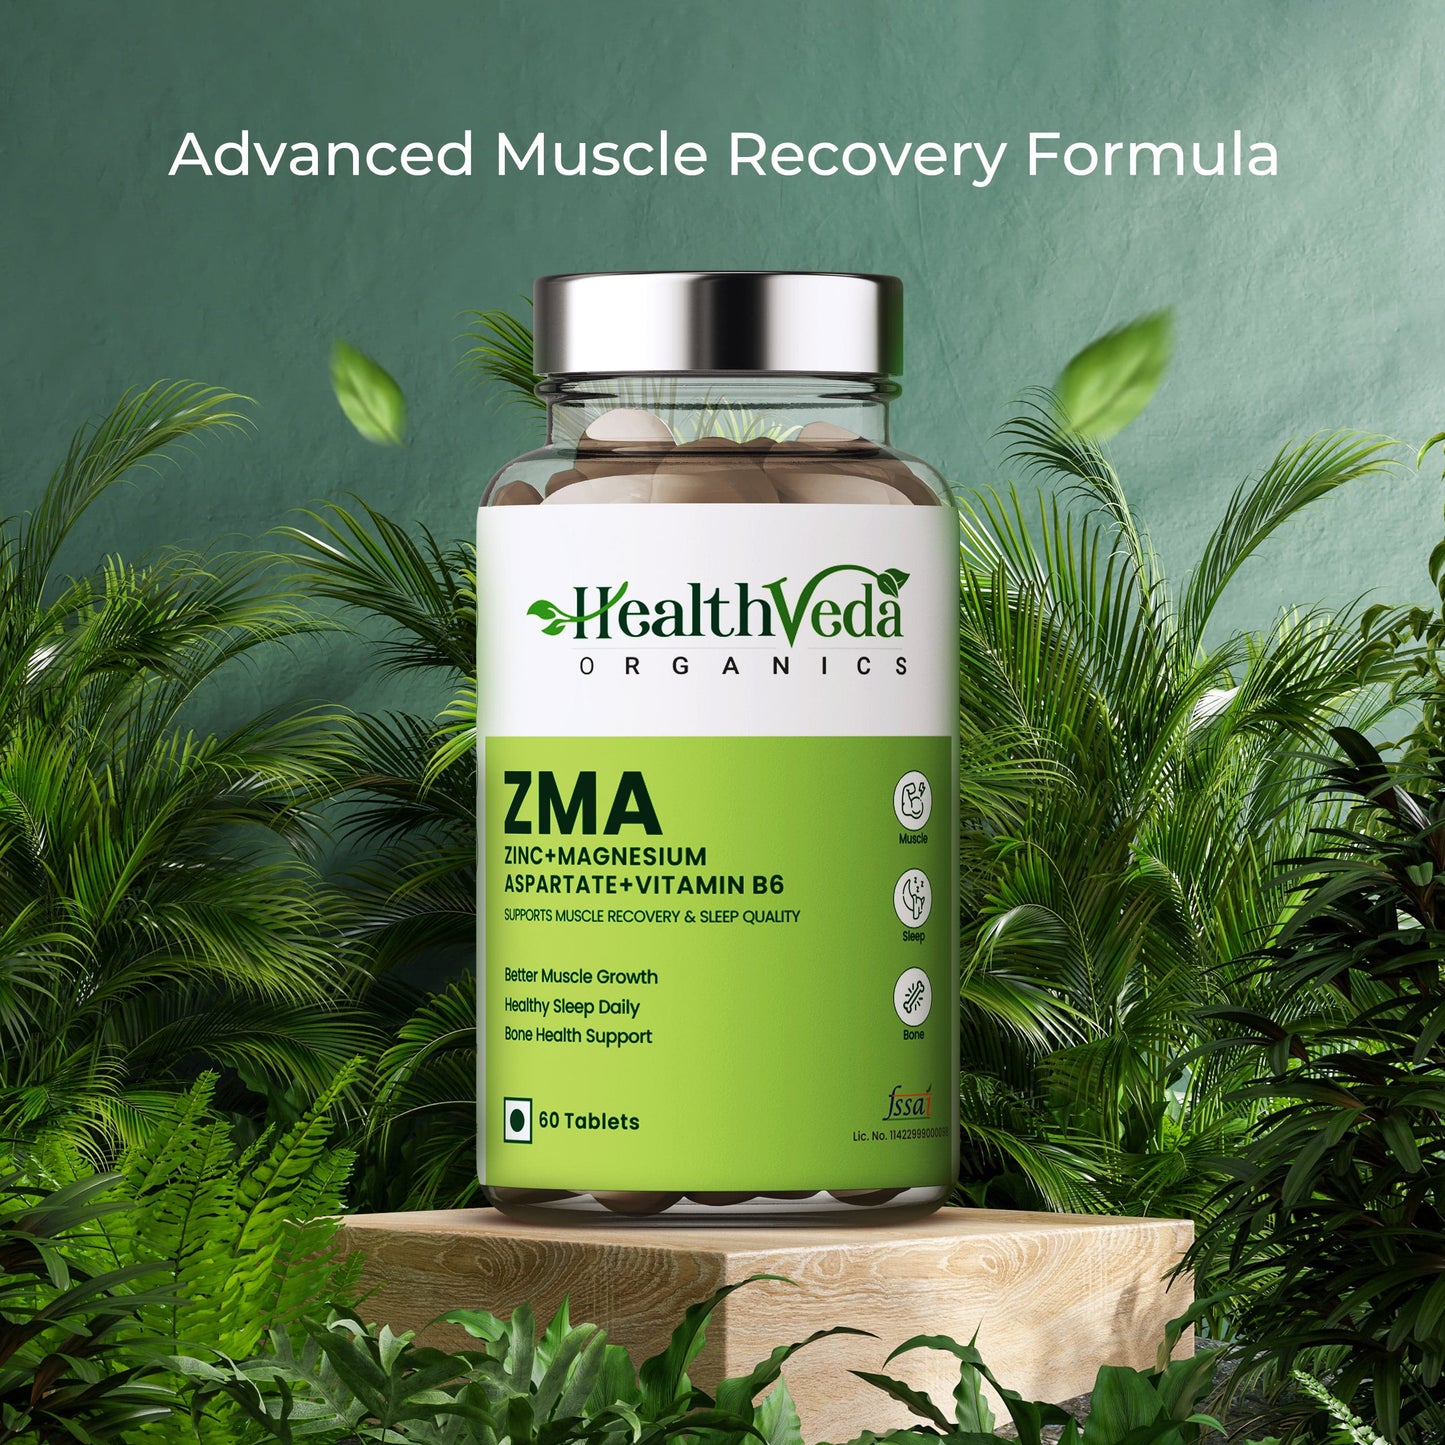 Health Veda Organics ZMA (Zinc, Magnesium Aspartate & Vitamin B6) | Supports Muscle Recovery & Sleep Quality | For Both Men & Women | 60 Veg Tablets